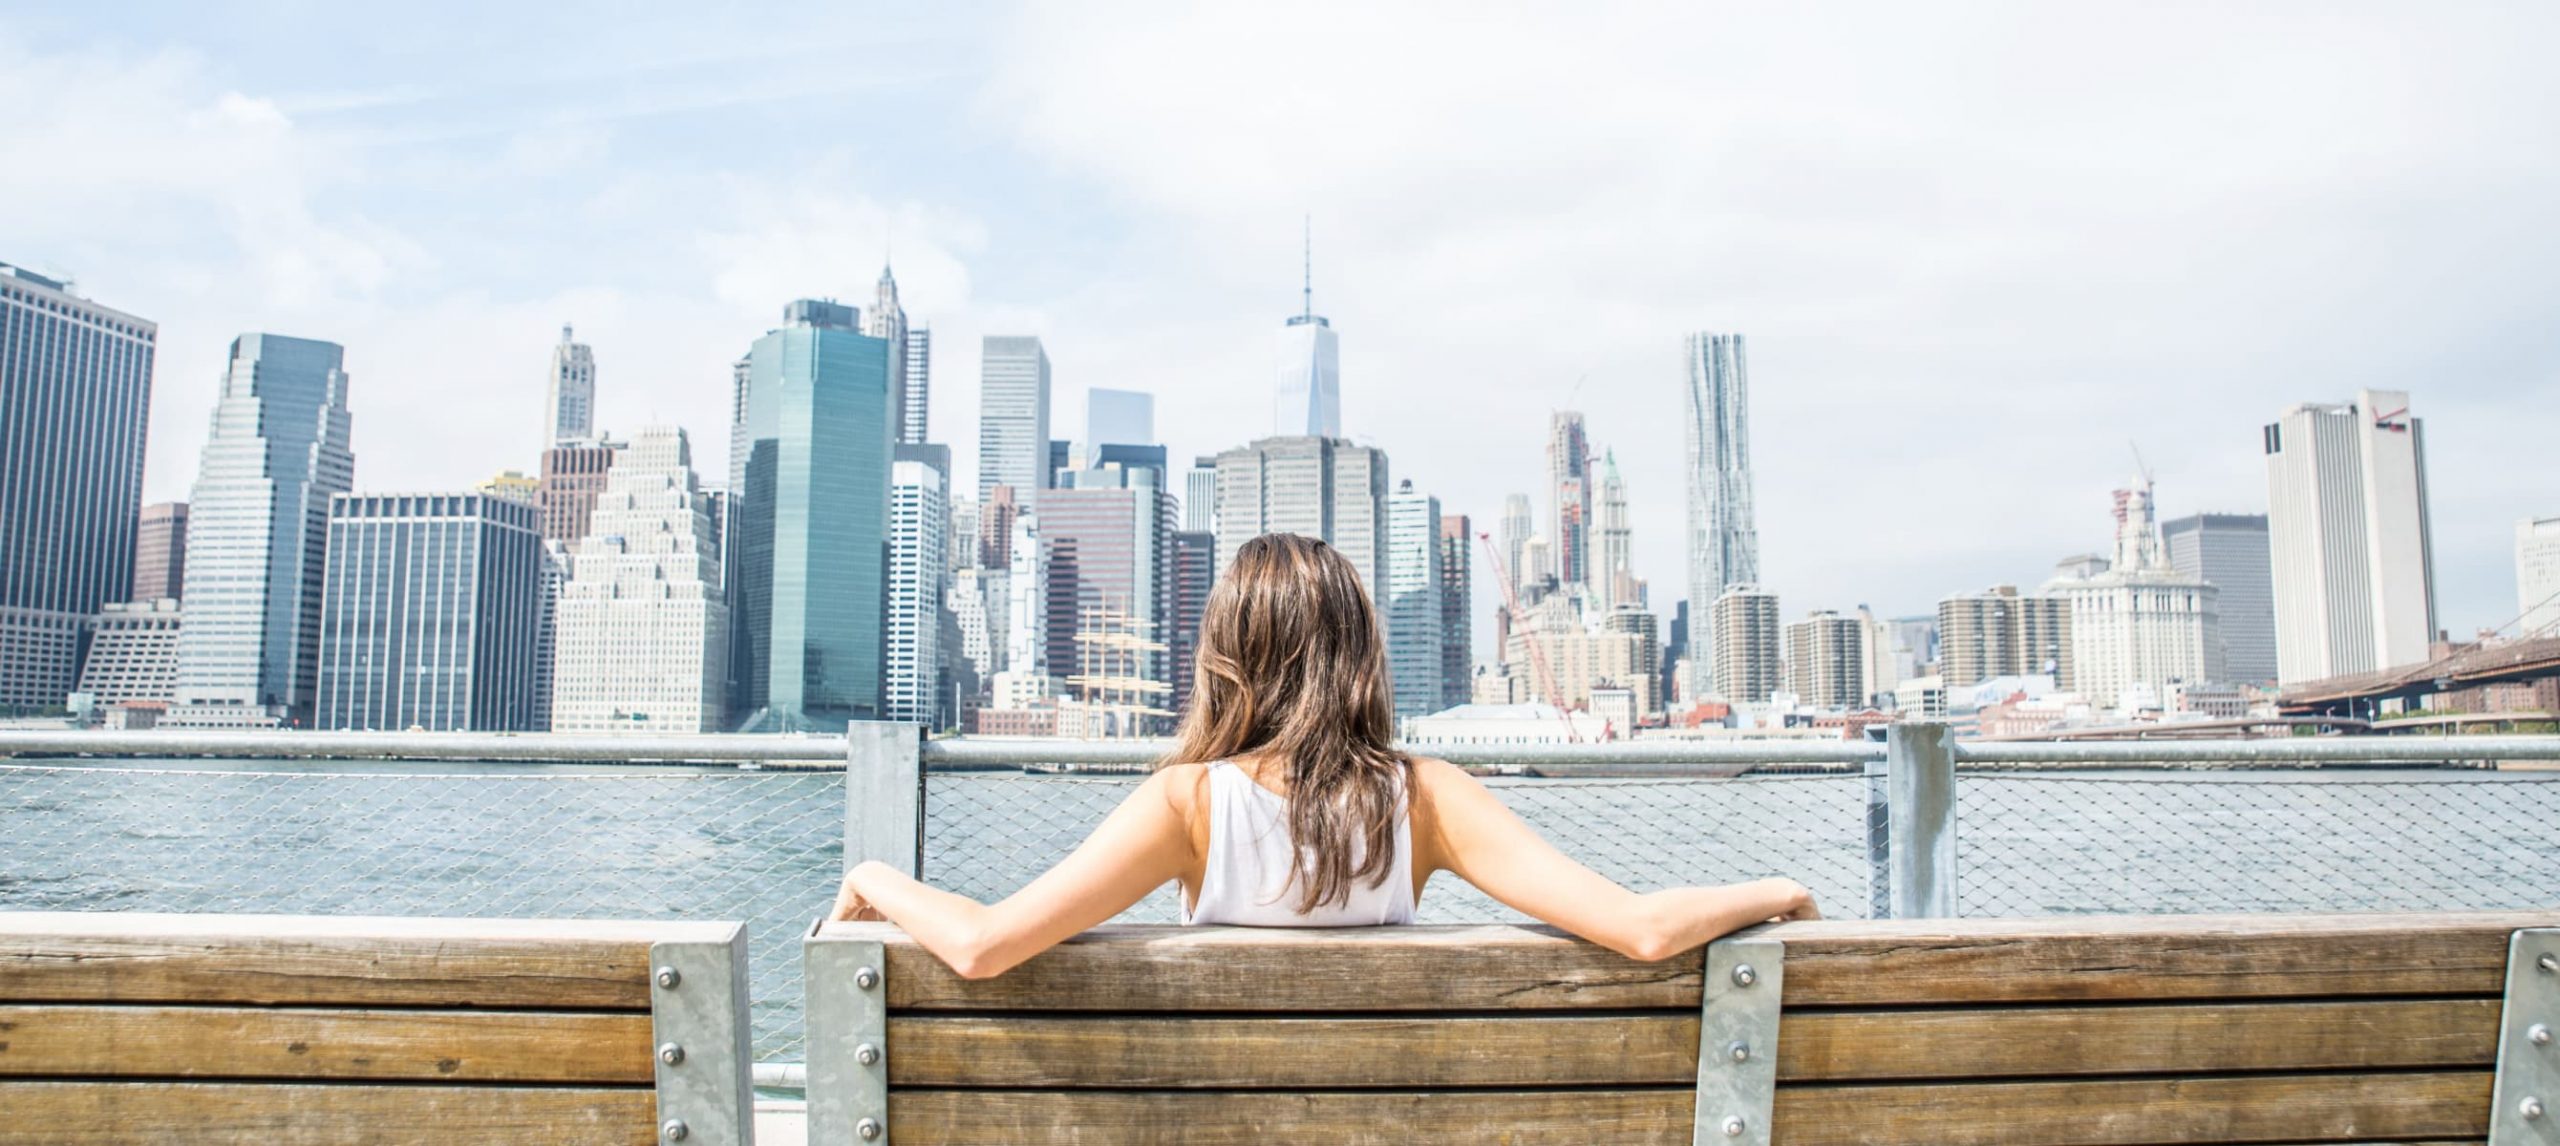 Young woman sitting on a bench and looking at New York skyline.